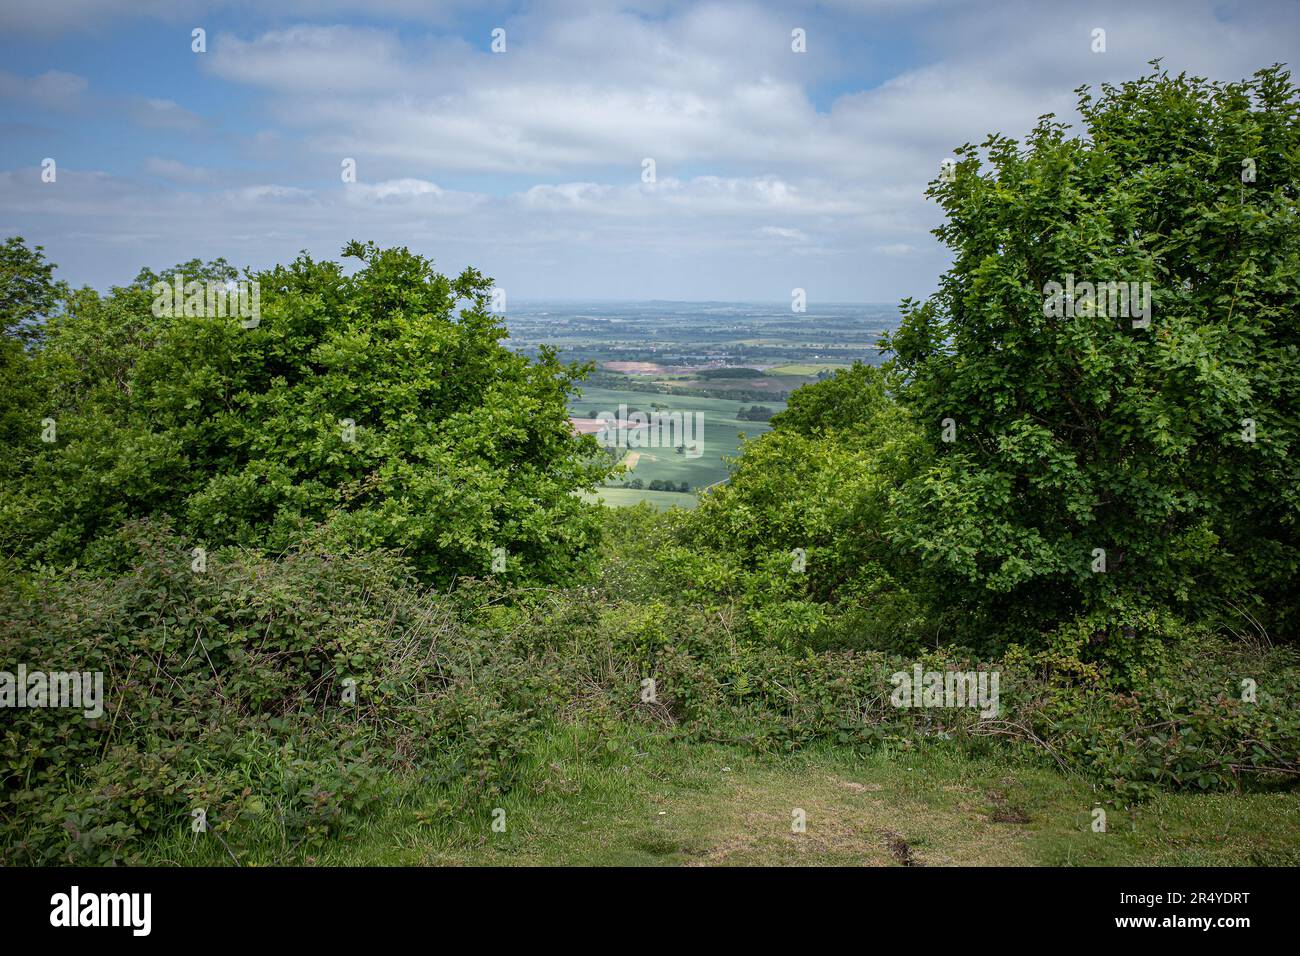 View from The Wrekin, a hill in Shropshire with wonderful views of the surrounding countryside. Concept of Exercise, well being or mental health. Stock Photo